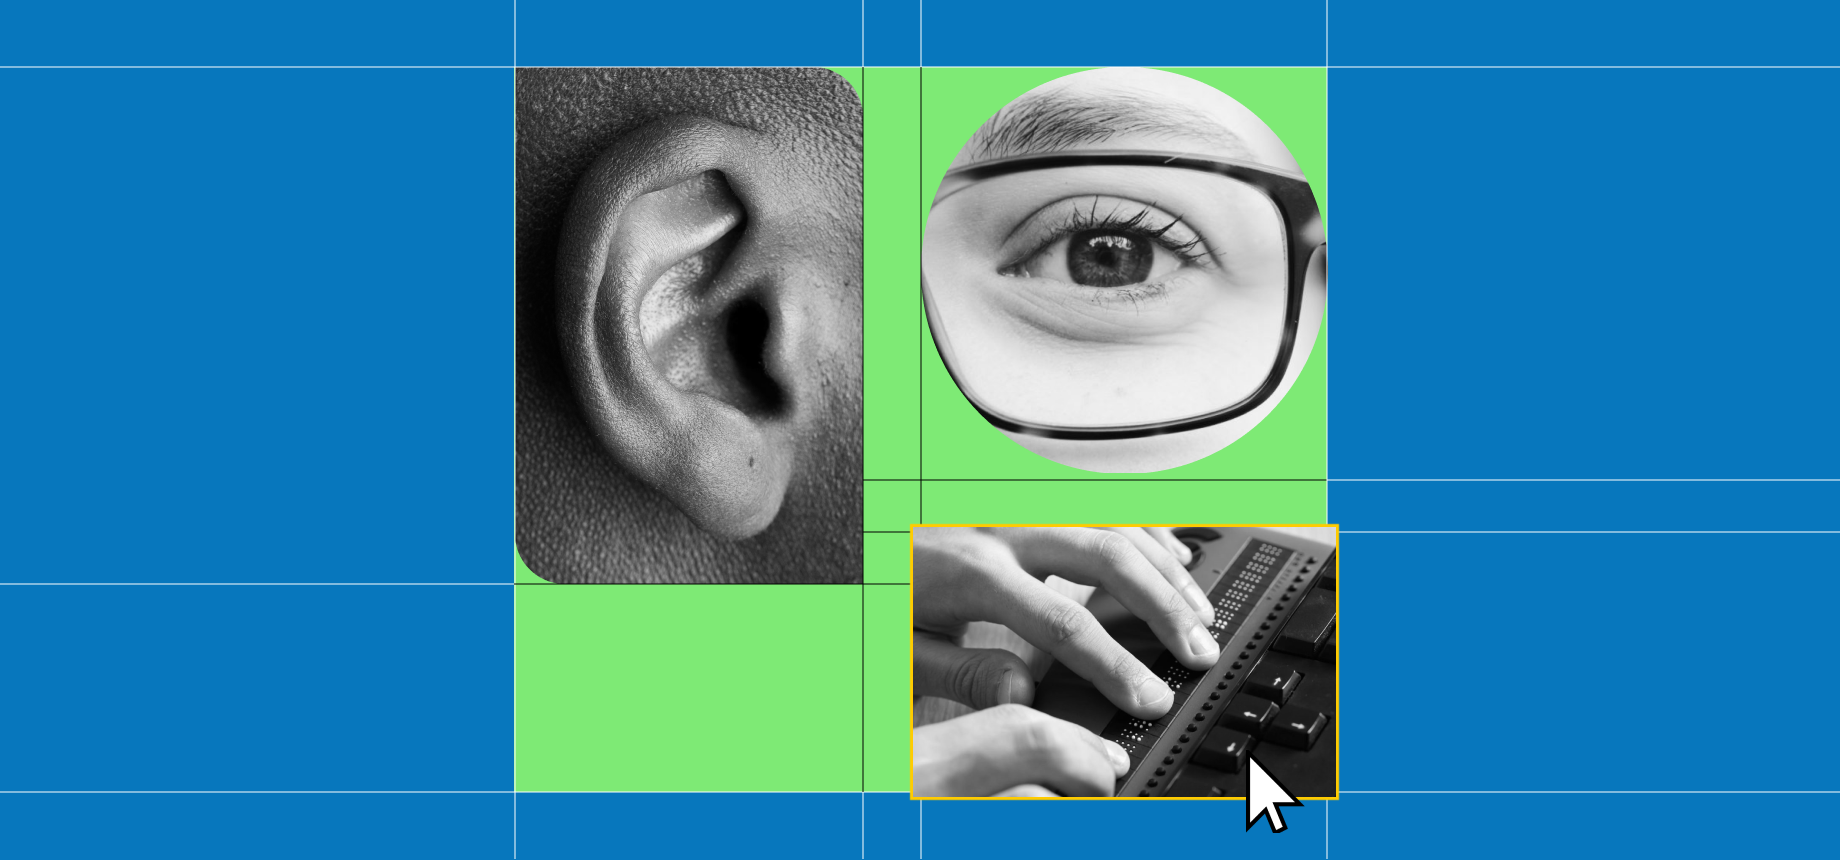 A collage of photographs including an ear, an eye and a keyboard with a blue background